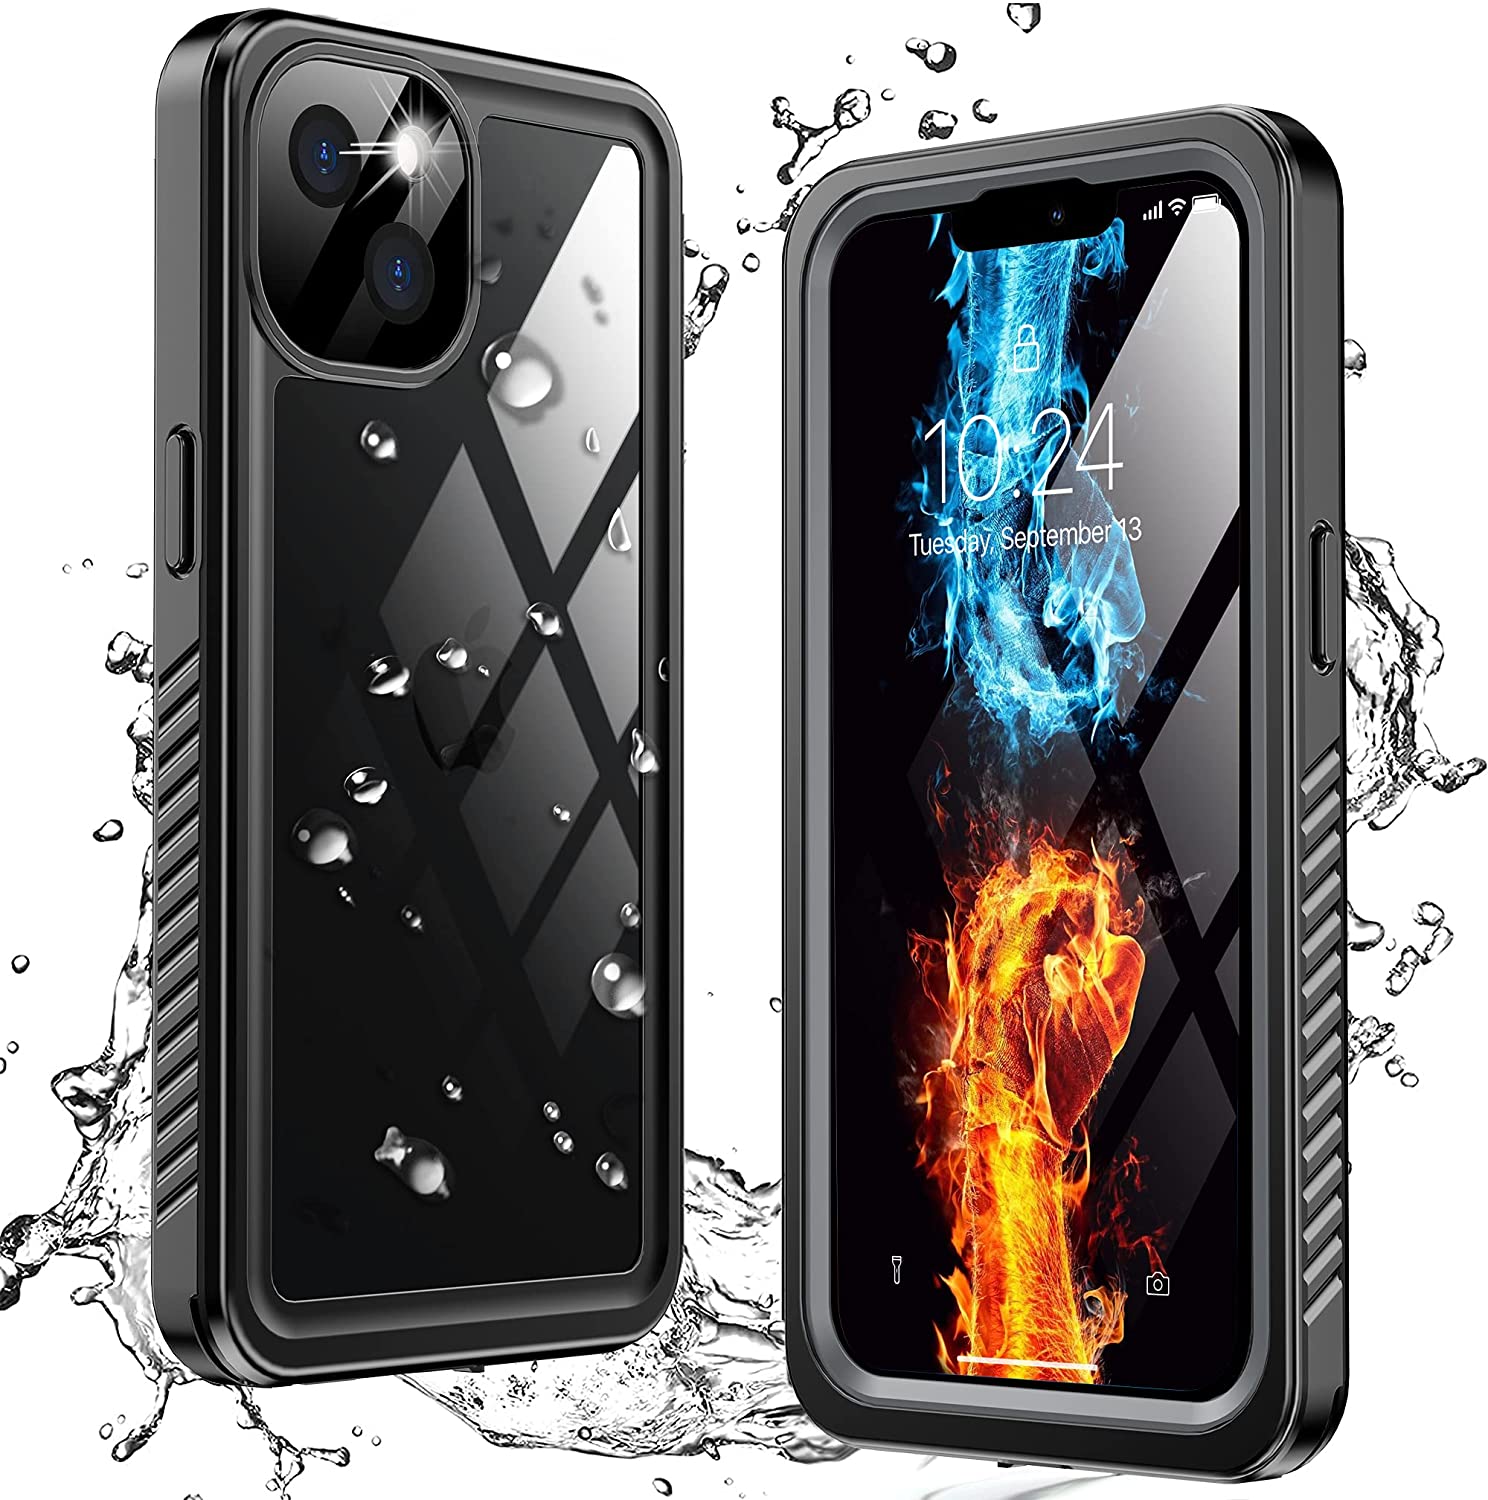 for iPhone 13 Case Waterproof Built in Screen Protector Full Body Dustproof Underwater Rugged Case for